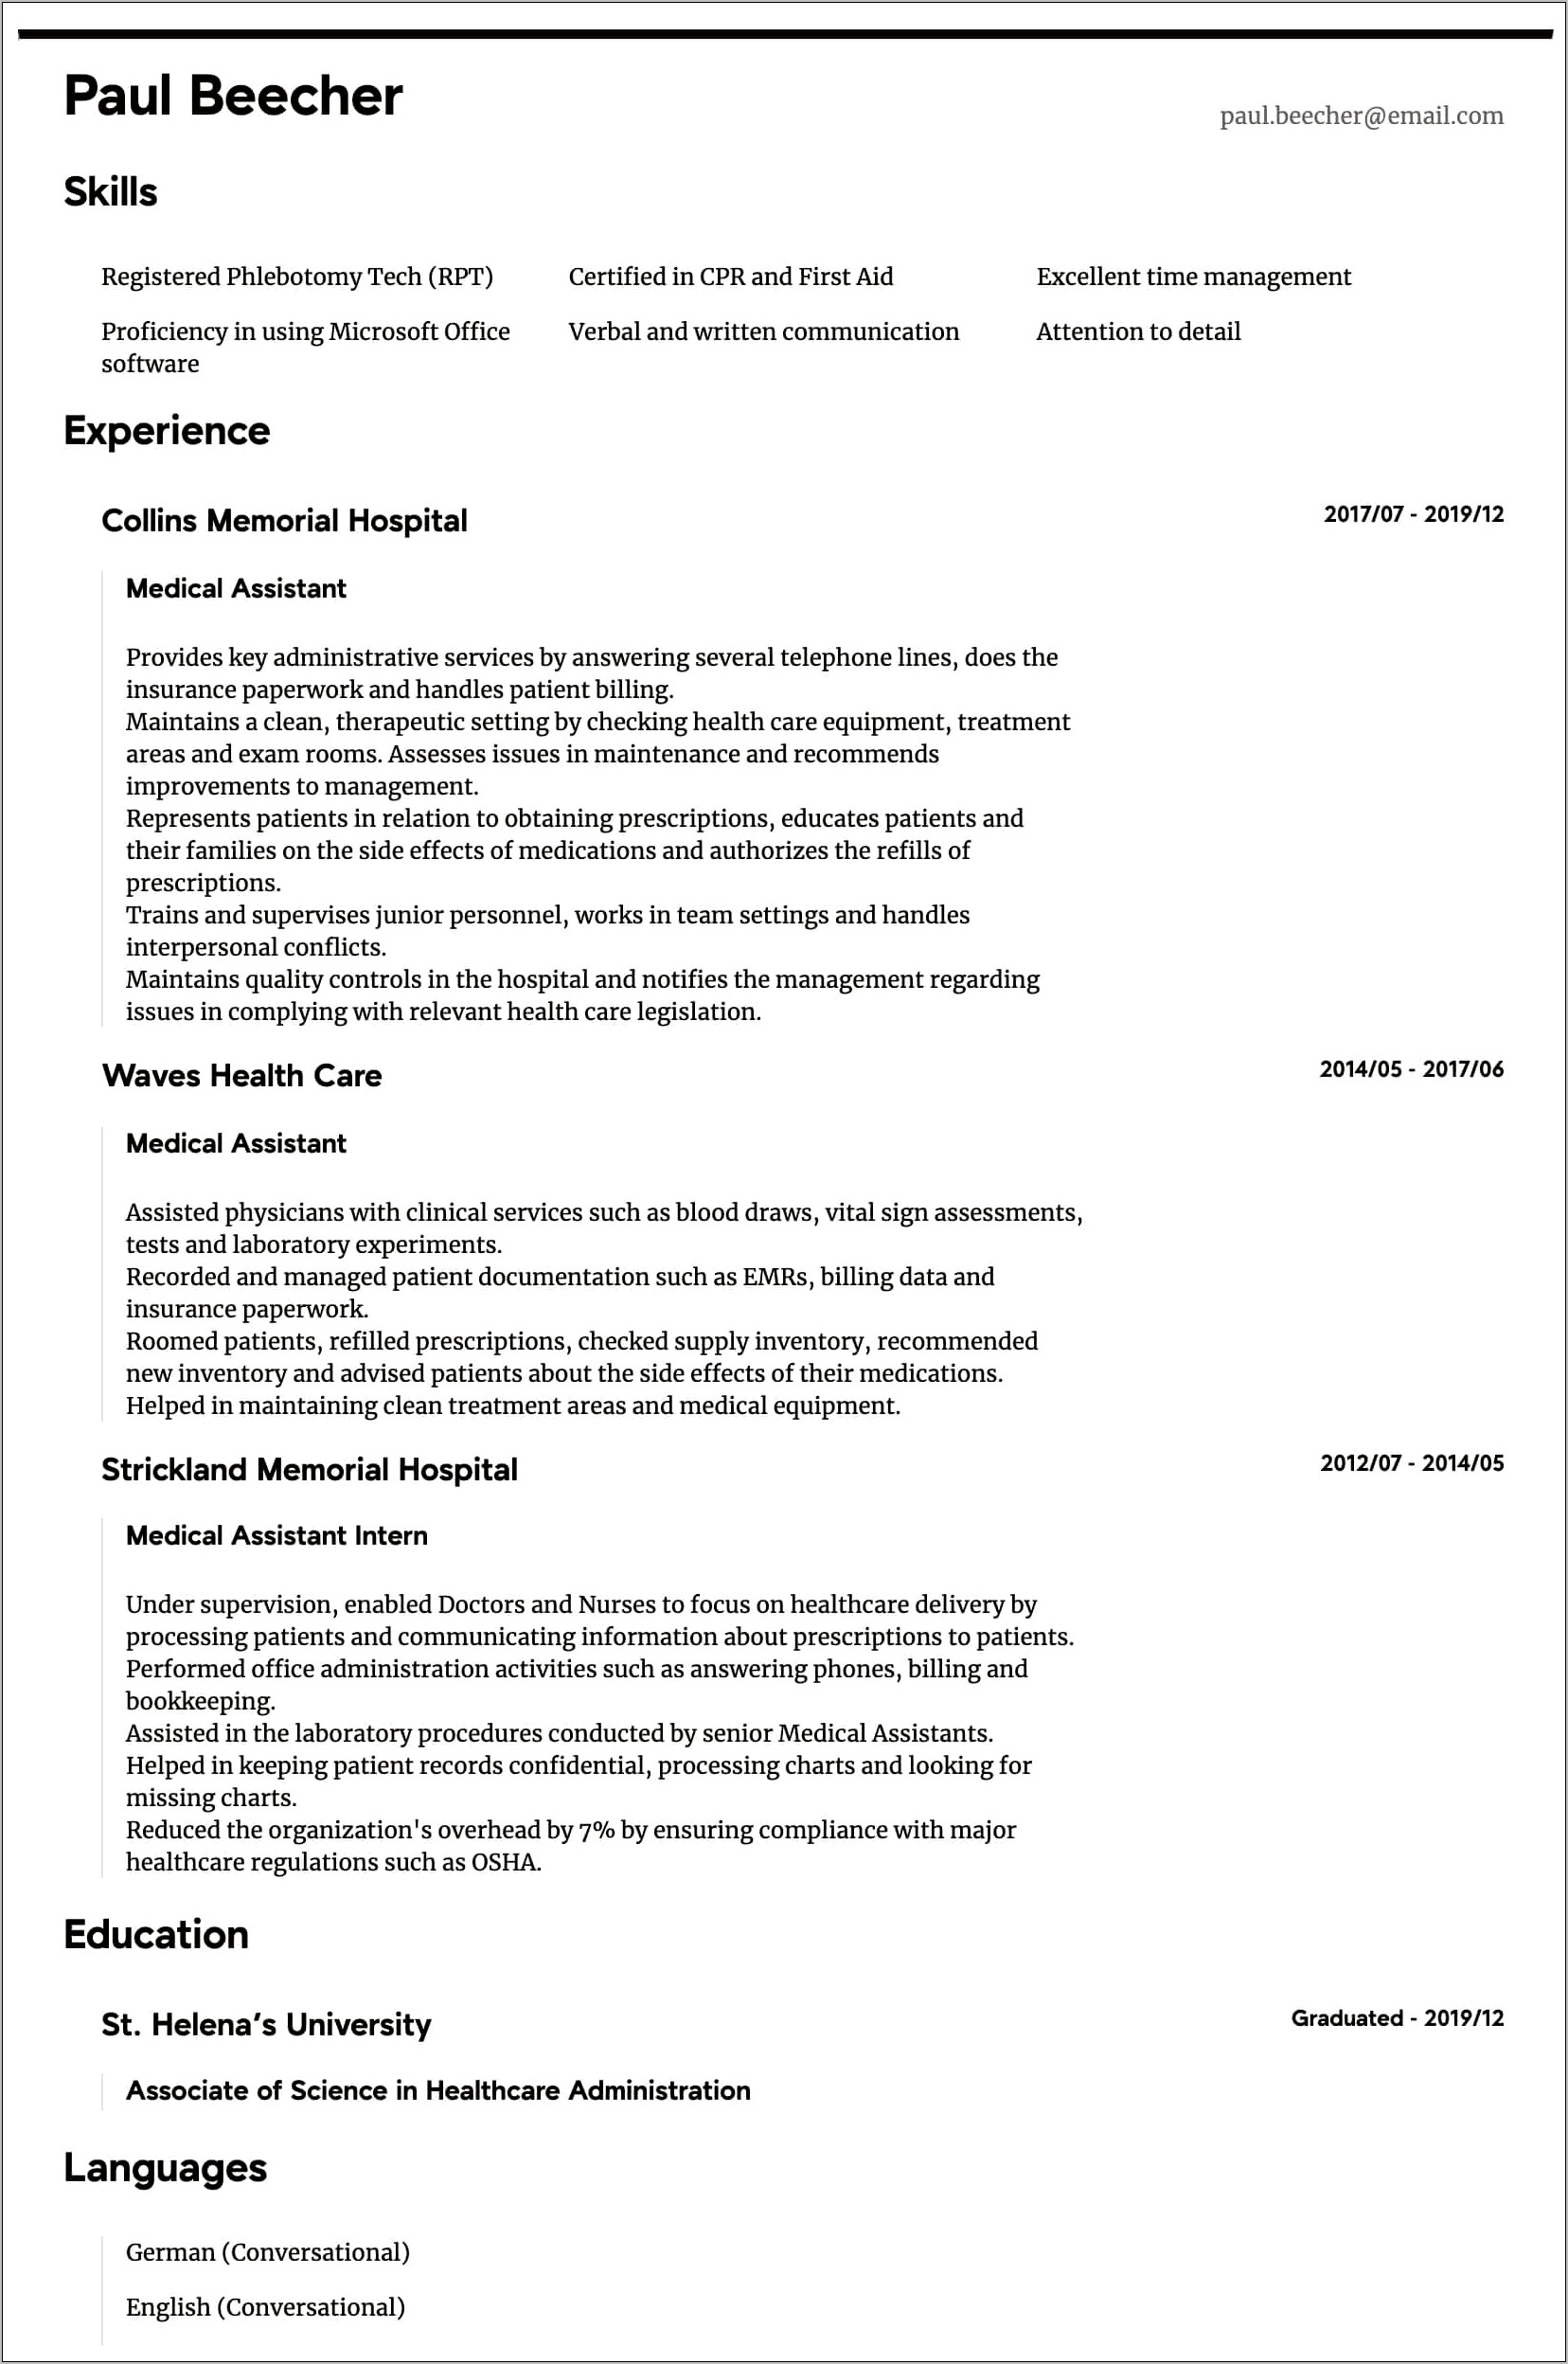 Medical Office Specialist Resume Objective